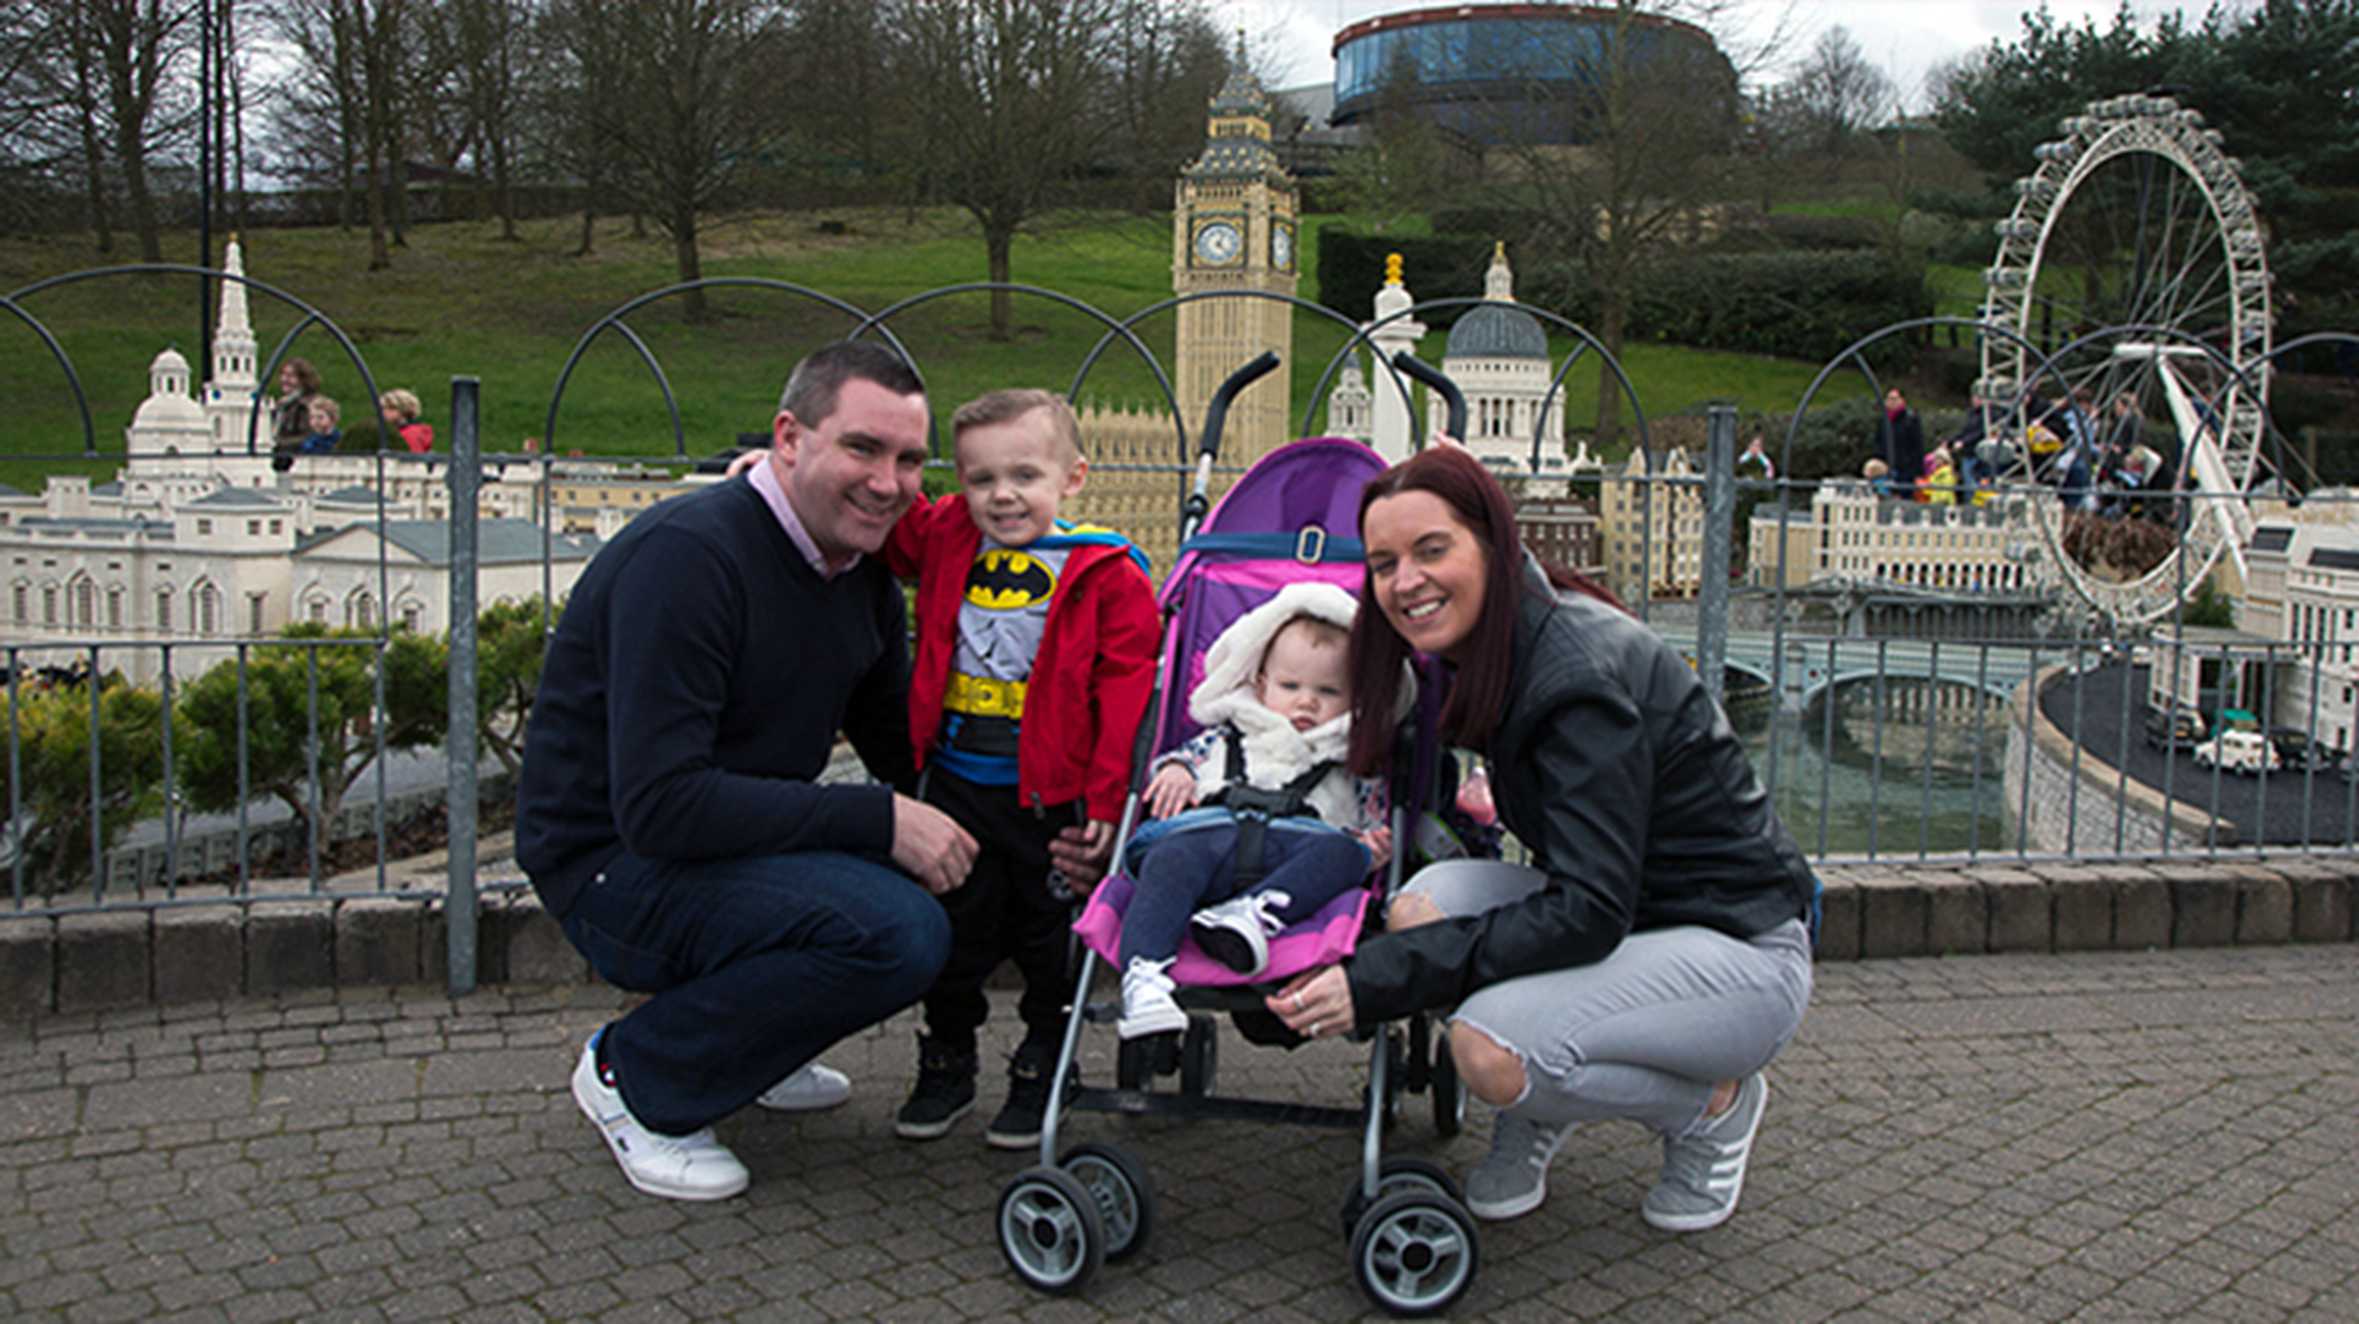 Zak posing in front of Legoland's model village with his mum, dad and sister in a pram.